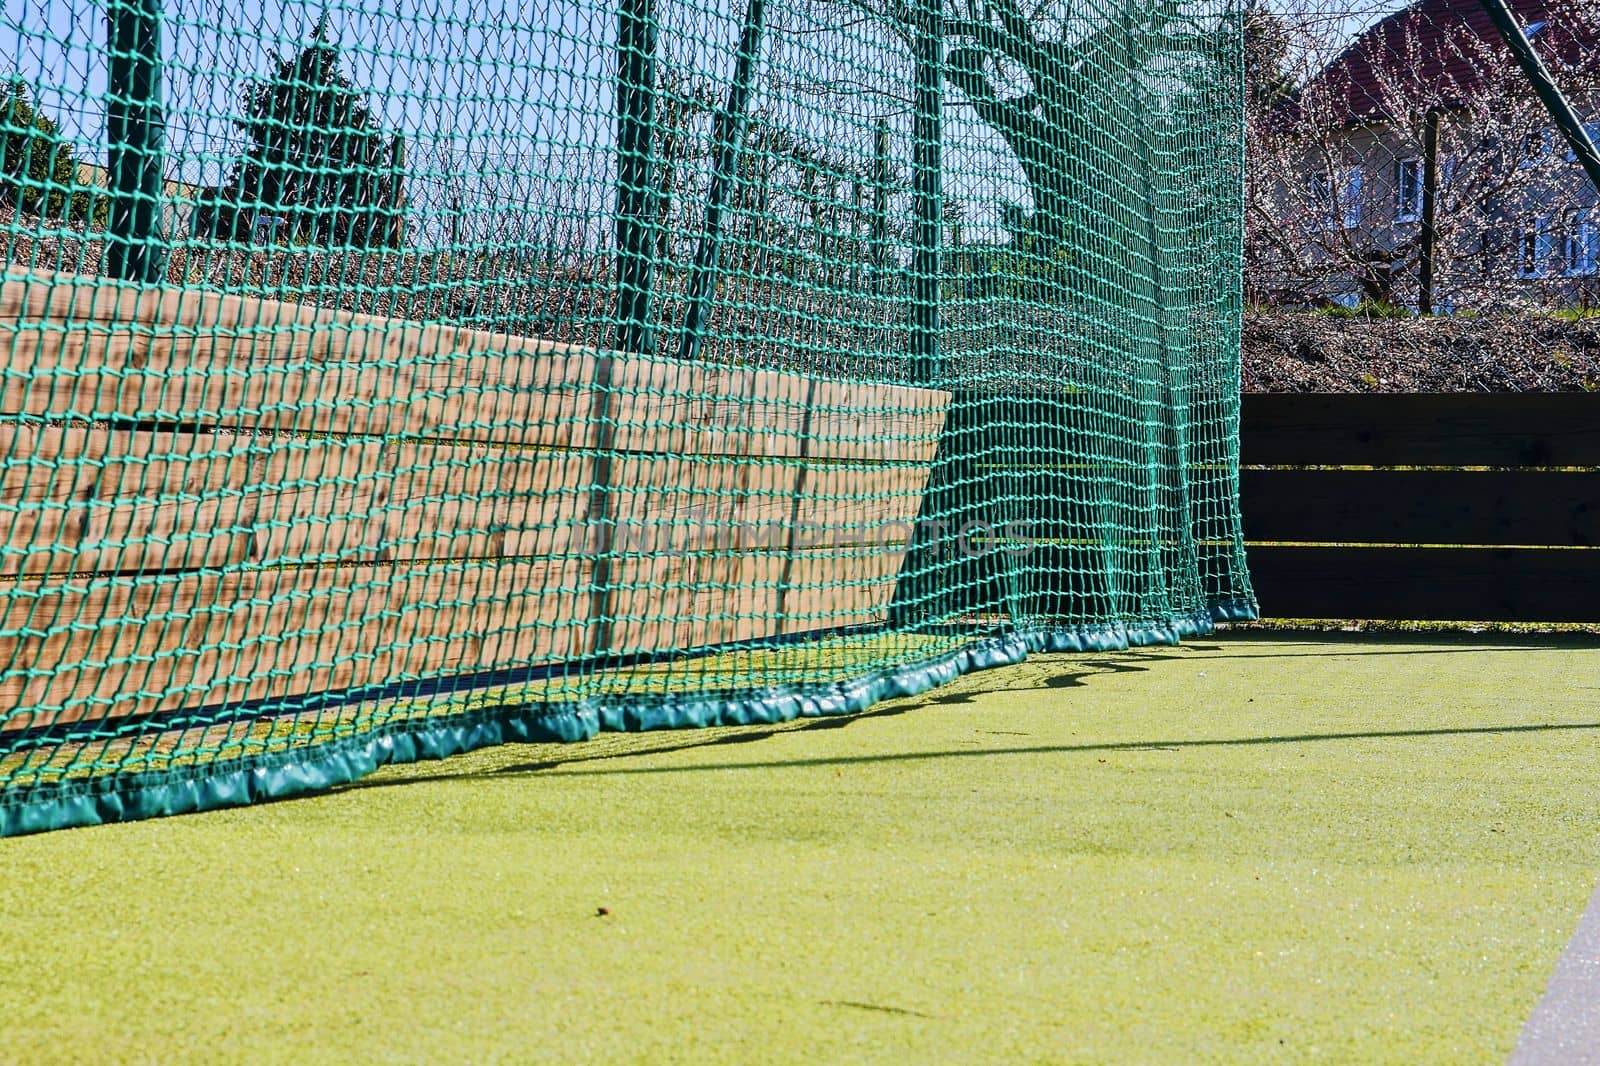 Sport net on playing field. Sport texture and background by roman_nerud